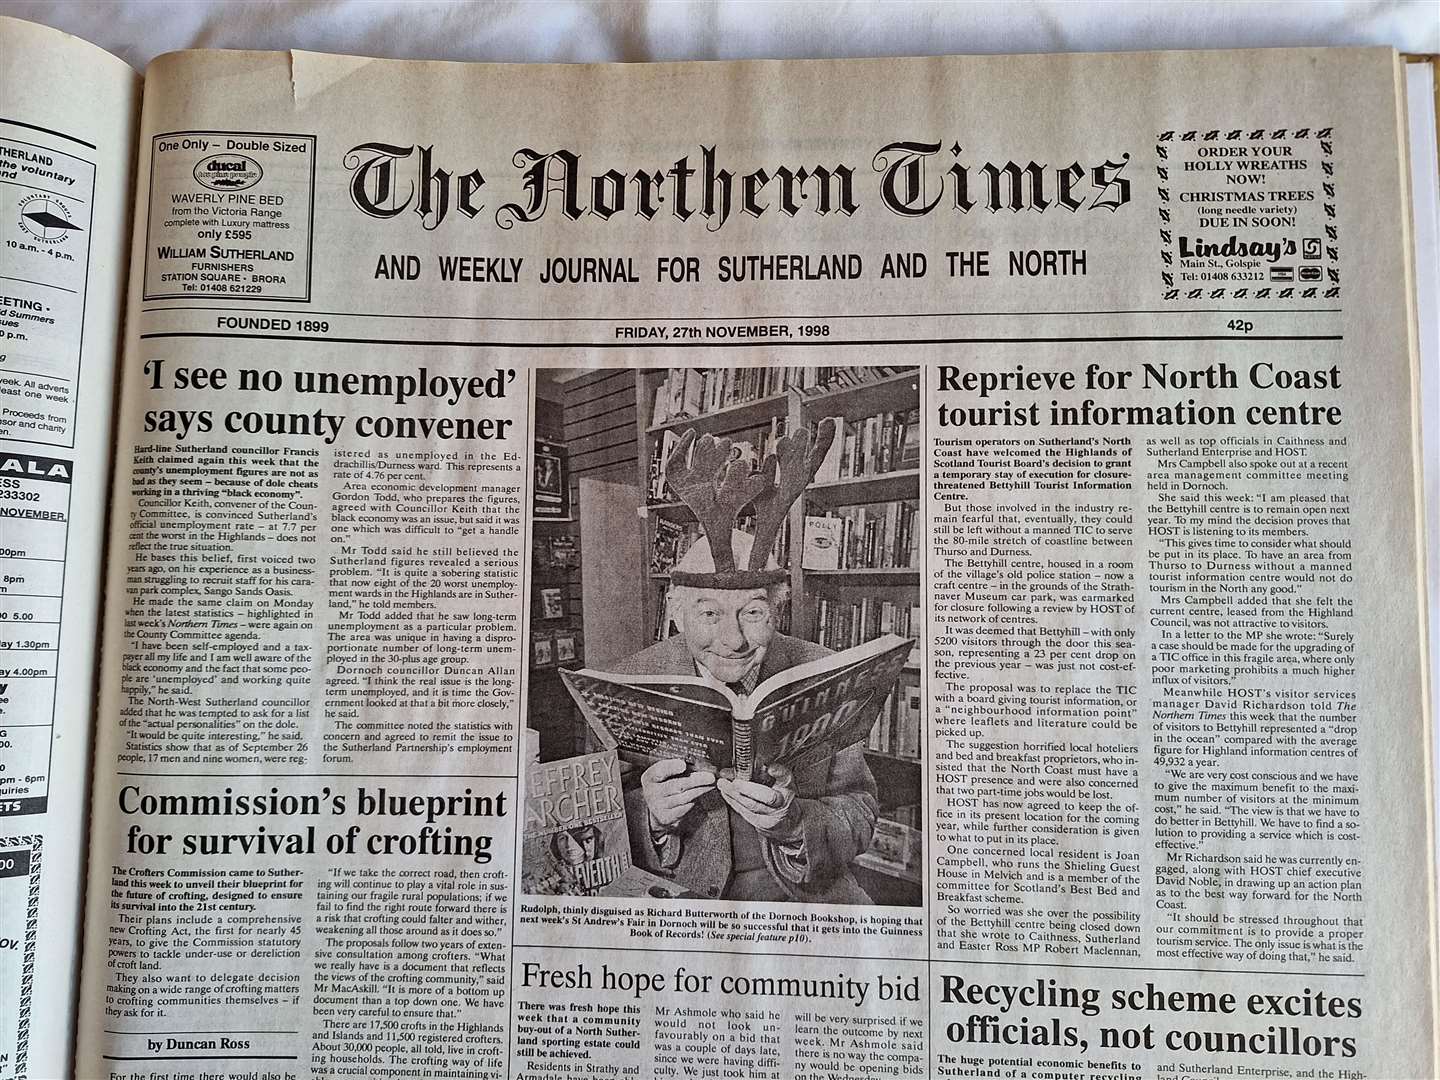 The edition of November 27, 1998.